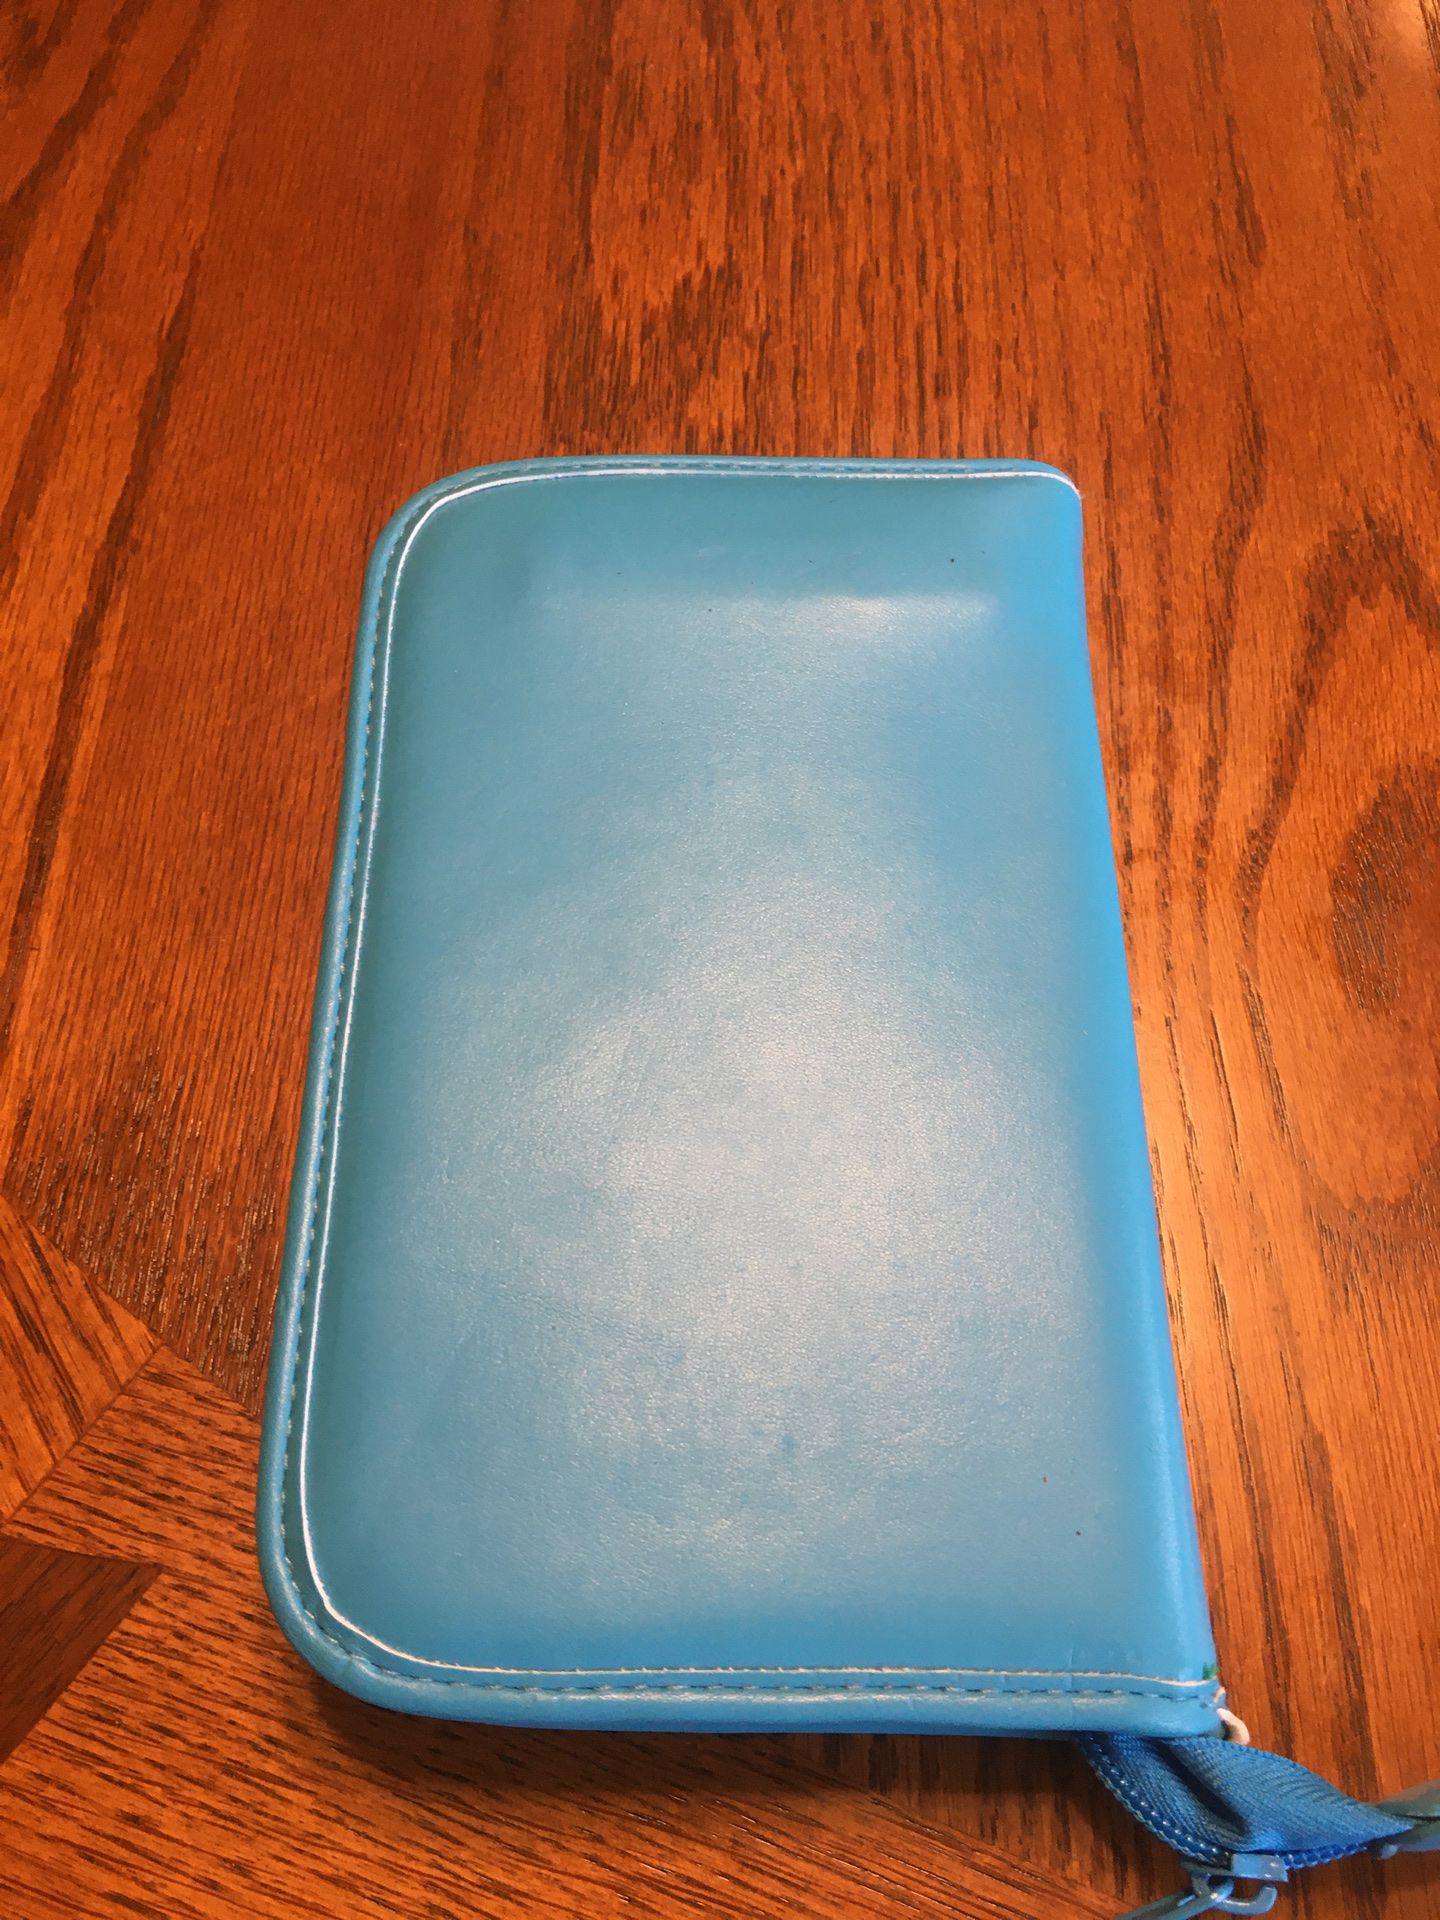 Travel Size Turquoise jewelry carrying case Approx. 5” X 8” X 1”